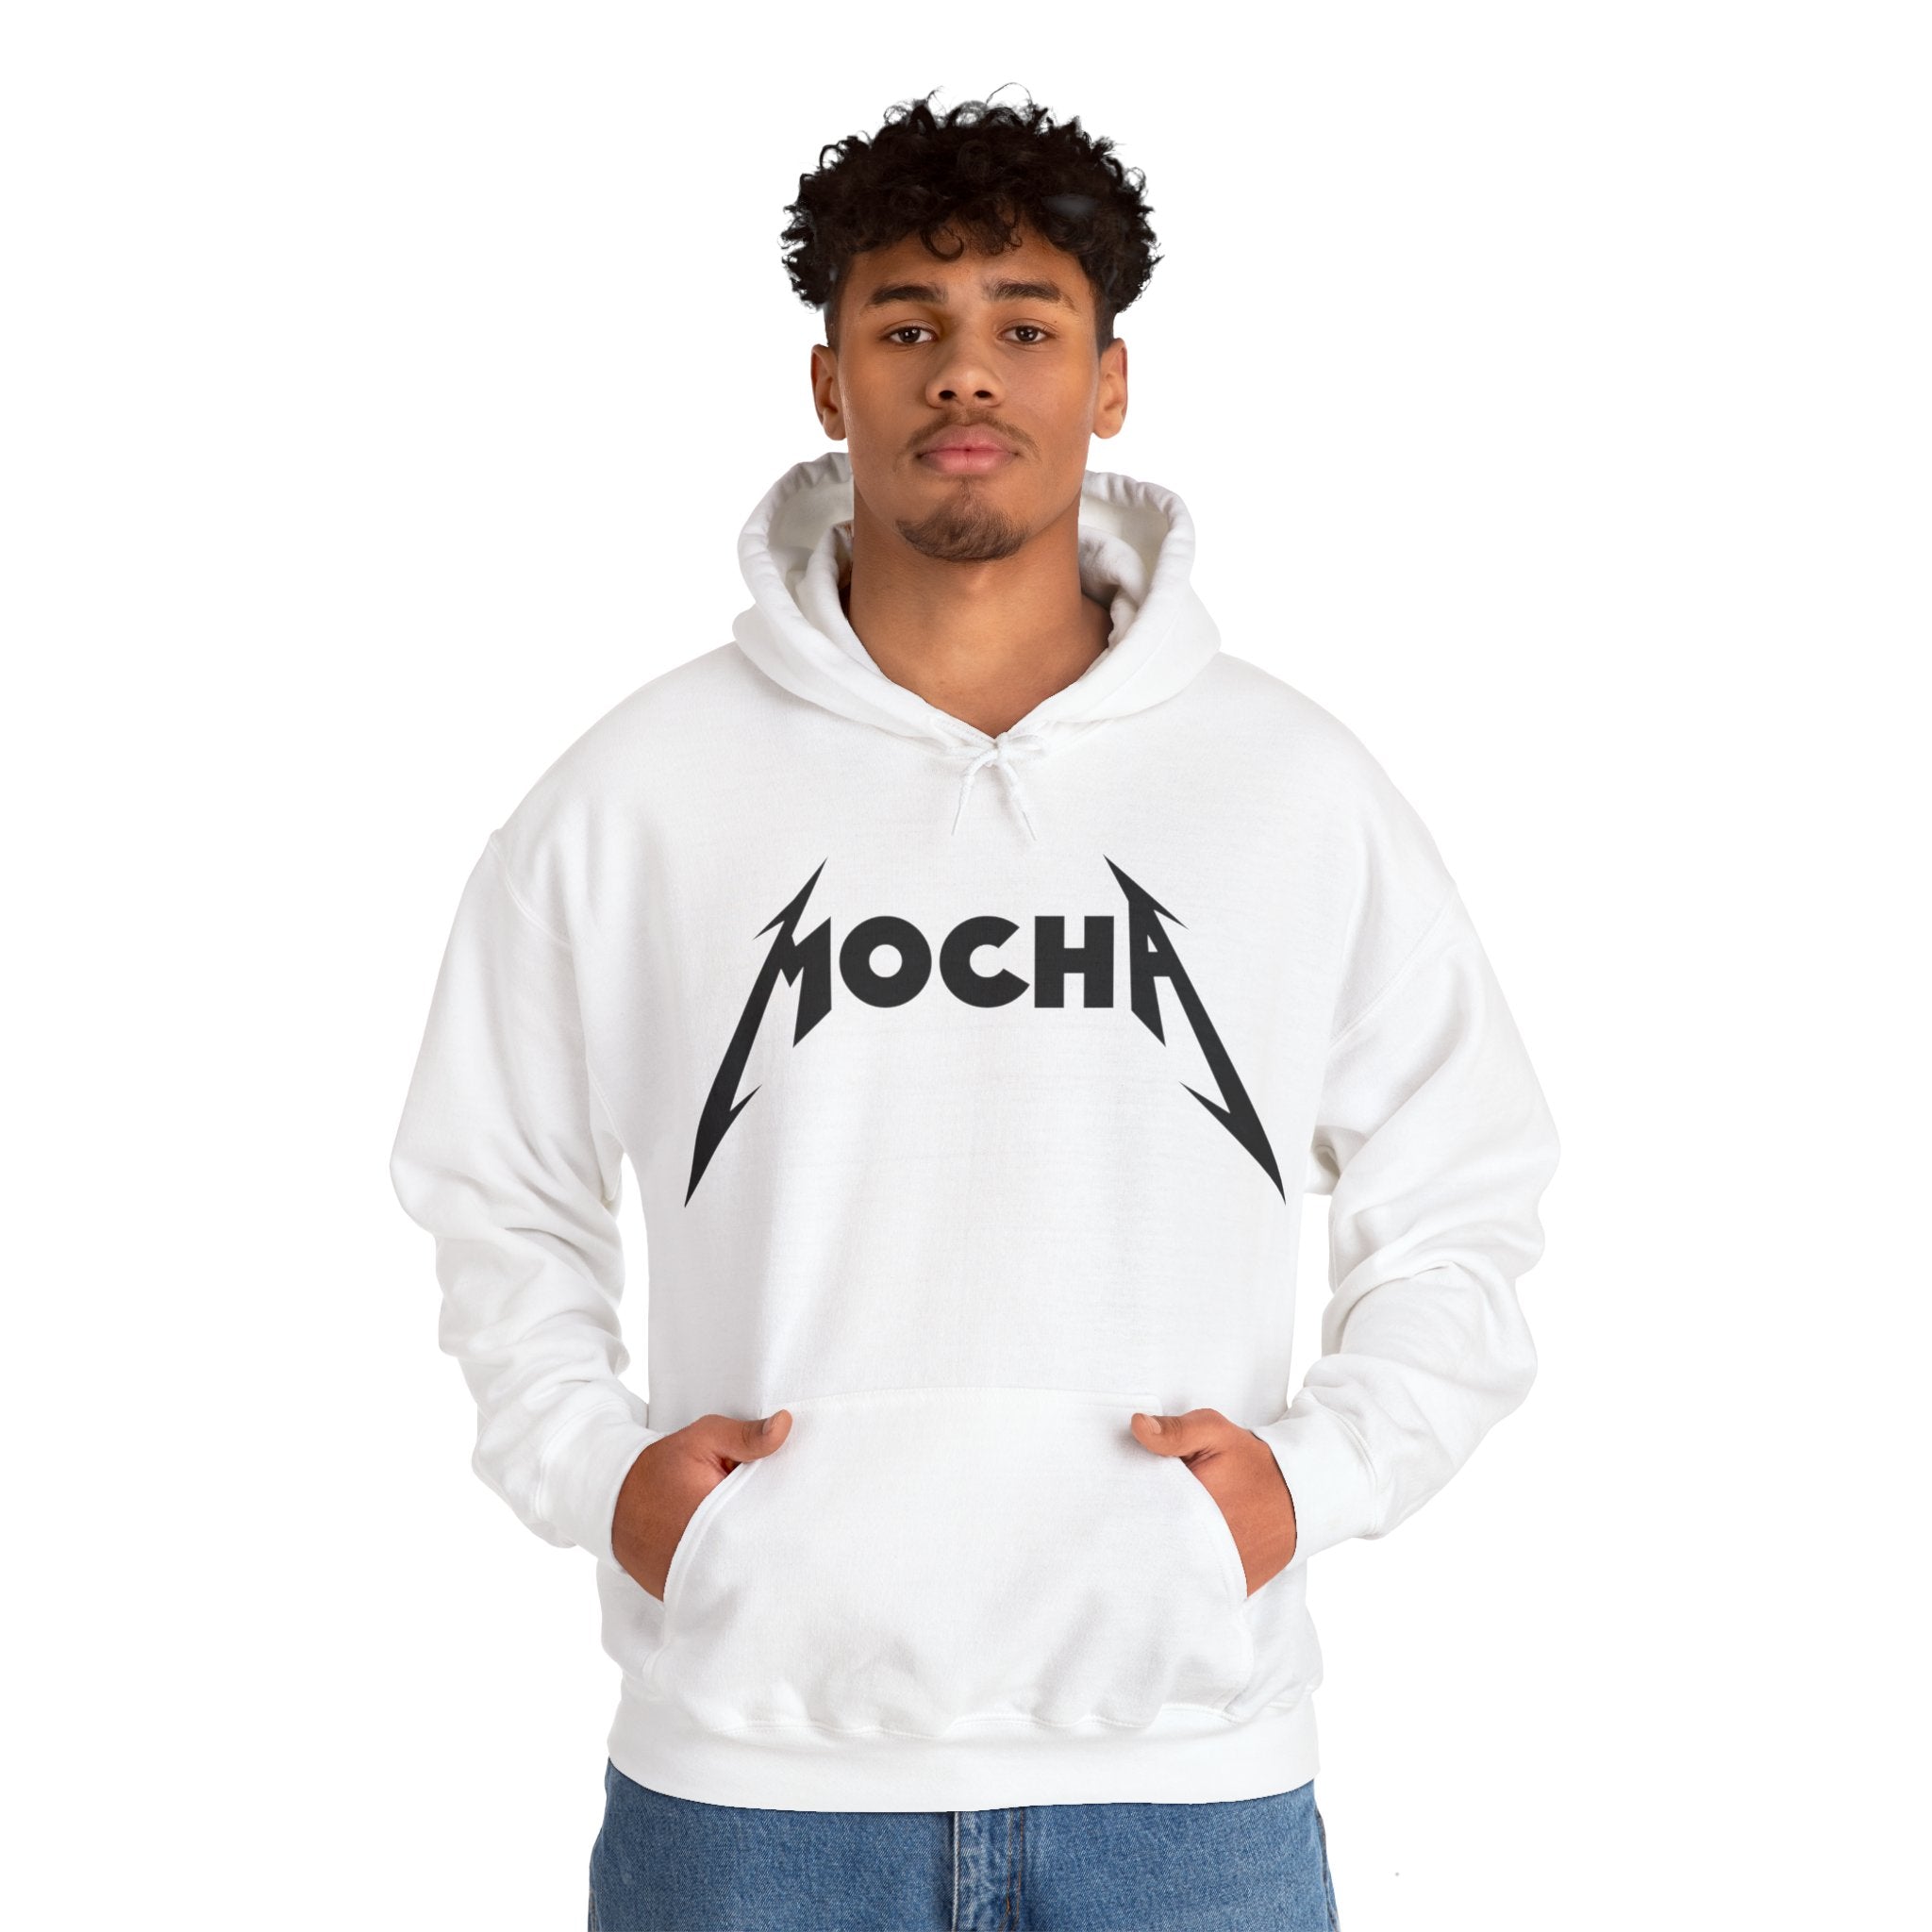 A person is wearing a white Mocha - Hooded Sweatshirt with "MOCHA" printed on the front in a stylized font. They are standing with their hands in the front pocket of the hoodie, showcasing its unique and tasteful blend of style and comfort.